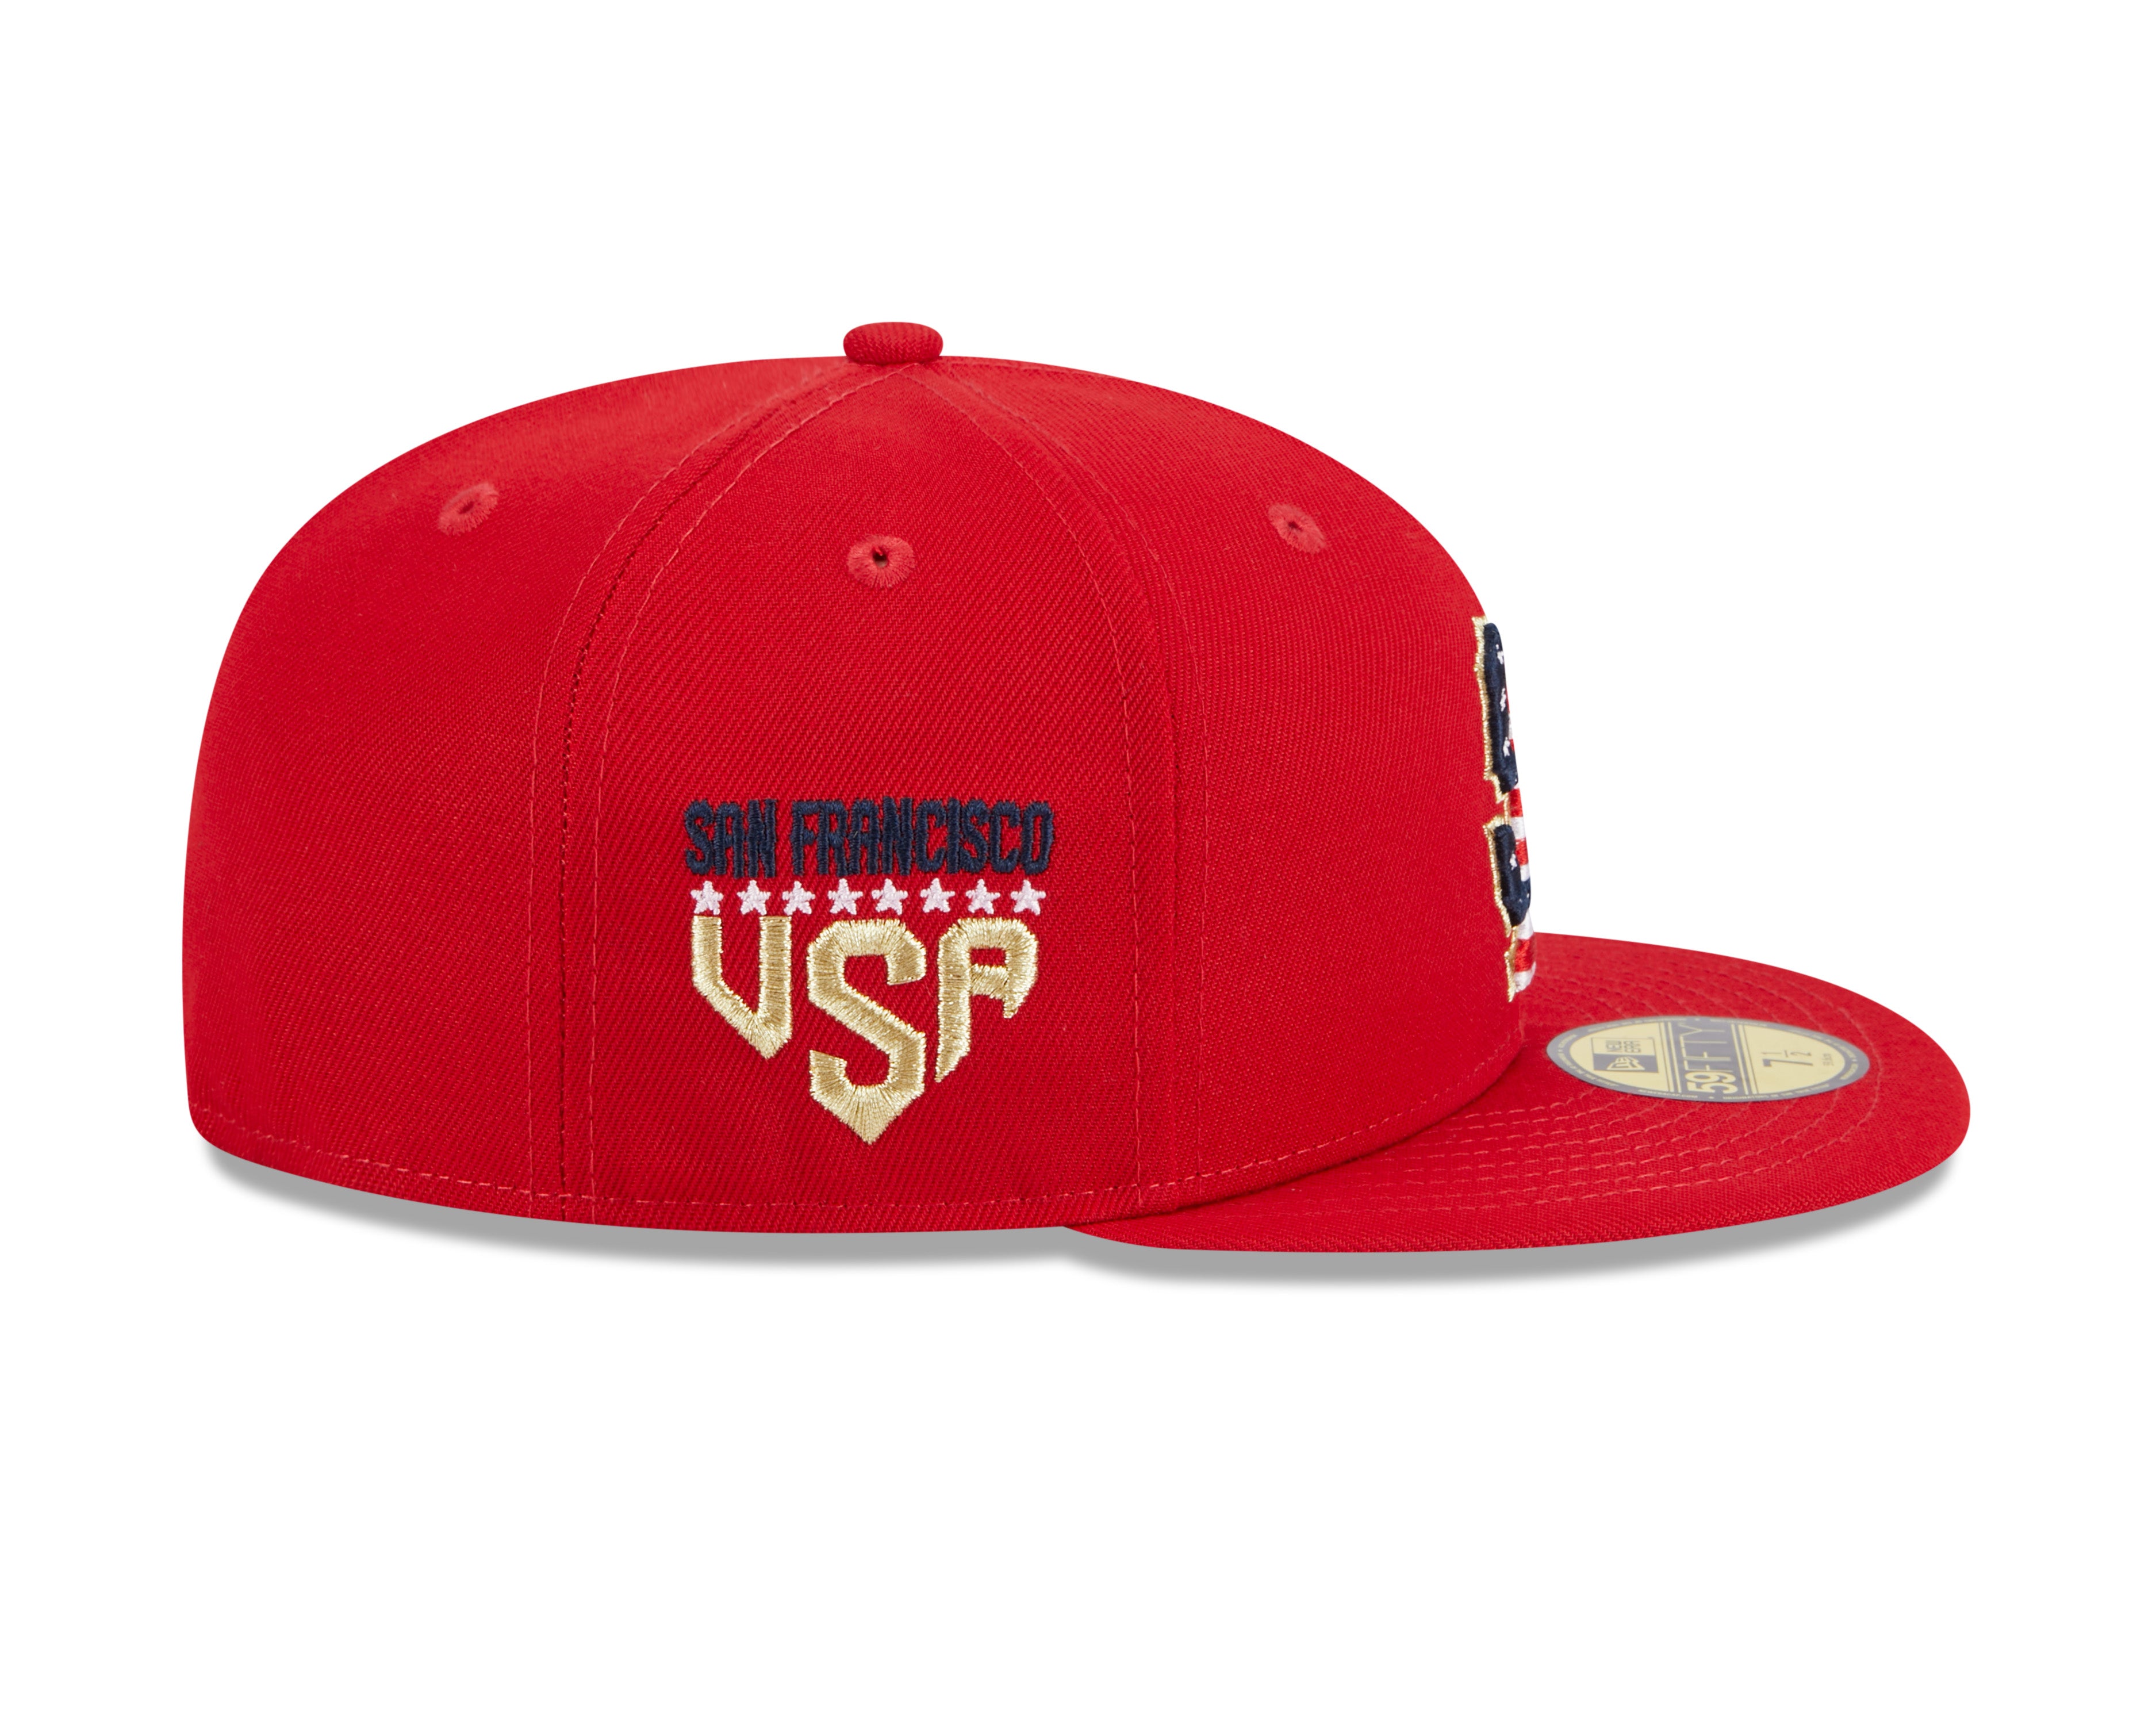 ST. LOUIS CARDINALS OFFICIAL NEW ERA MLB 59FIFTY JULY 4TH FITTED HAT CAP